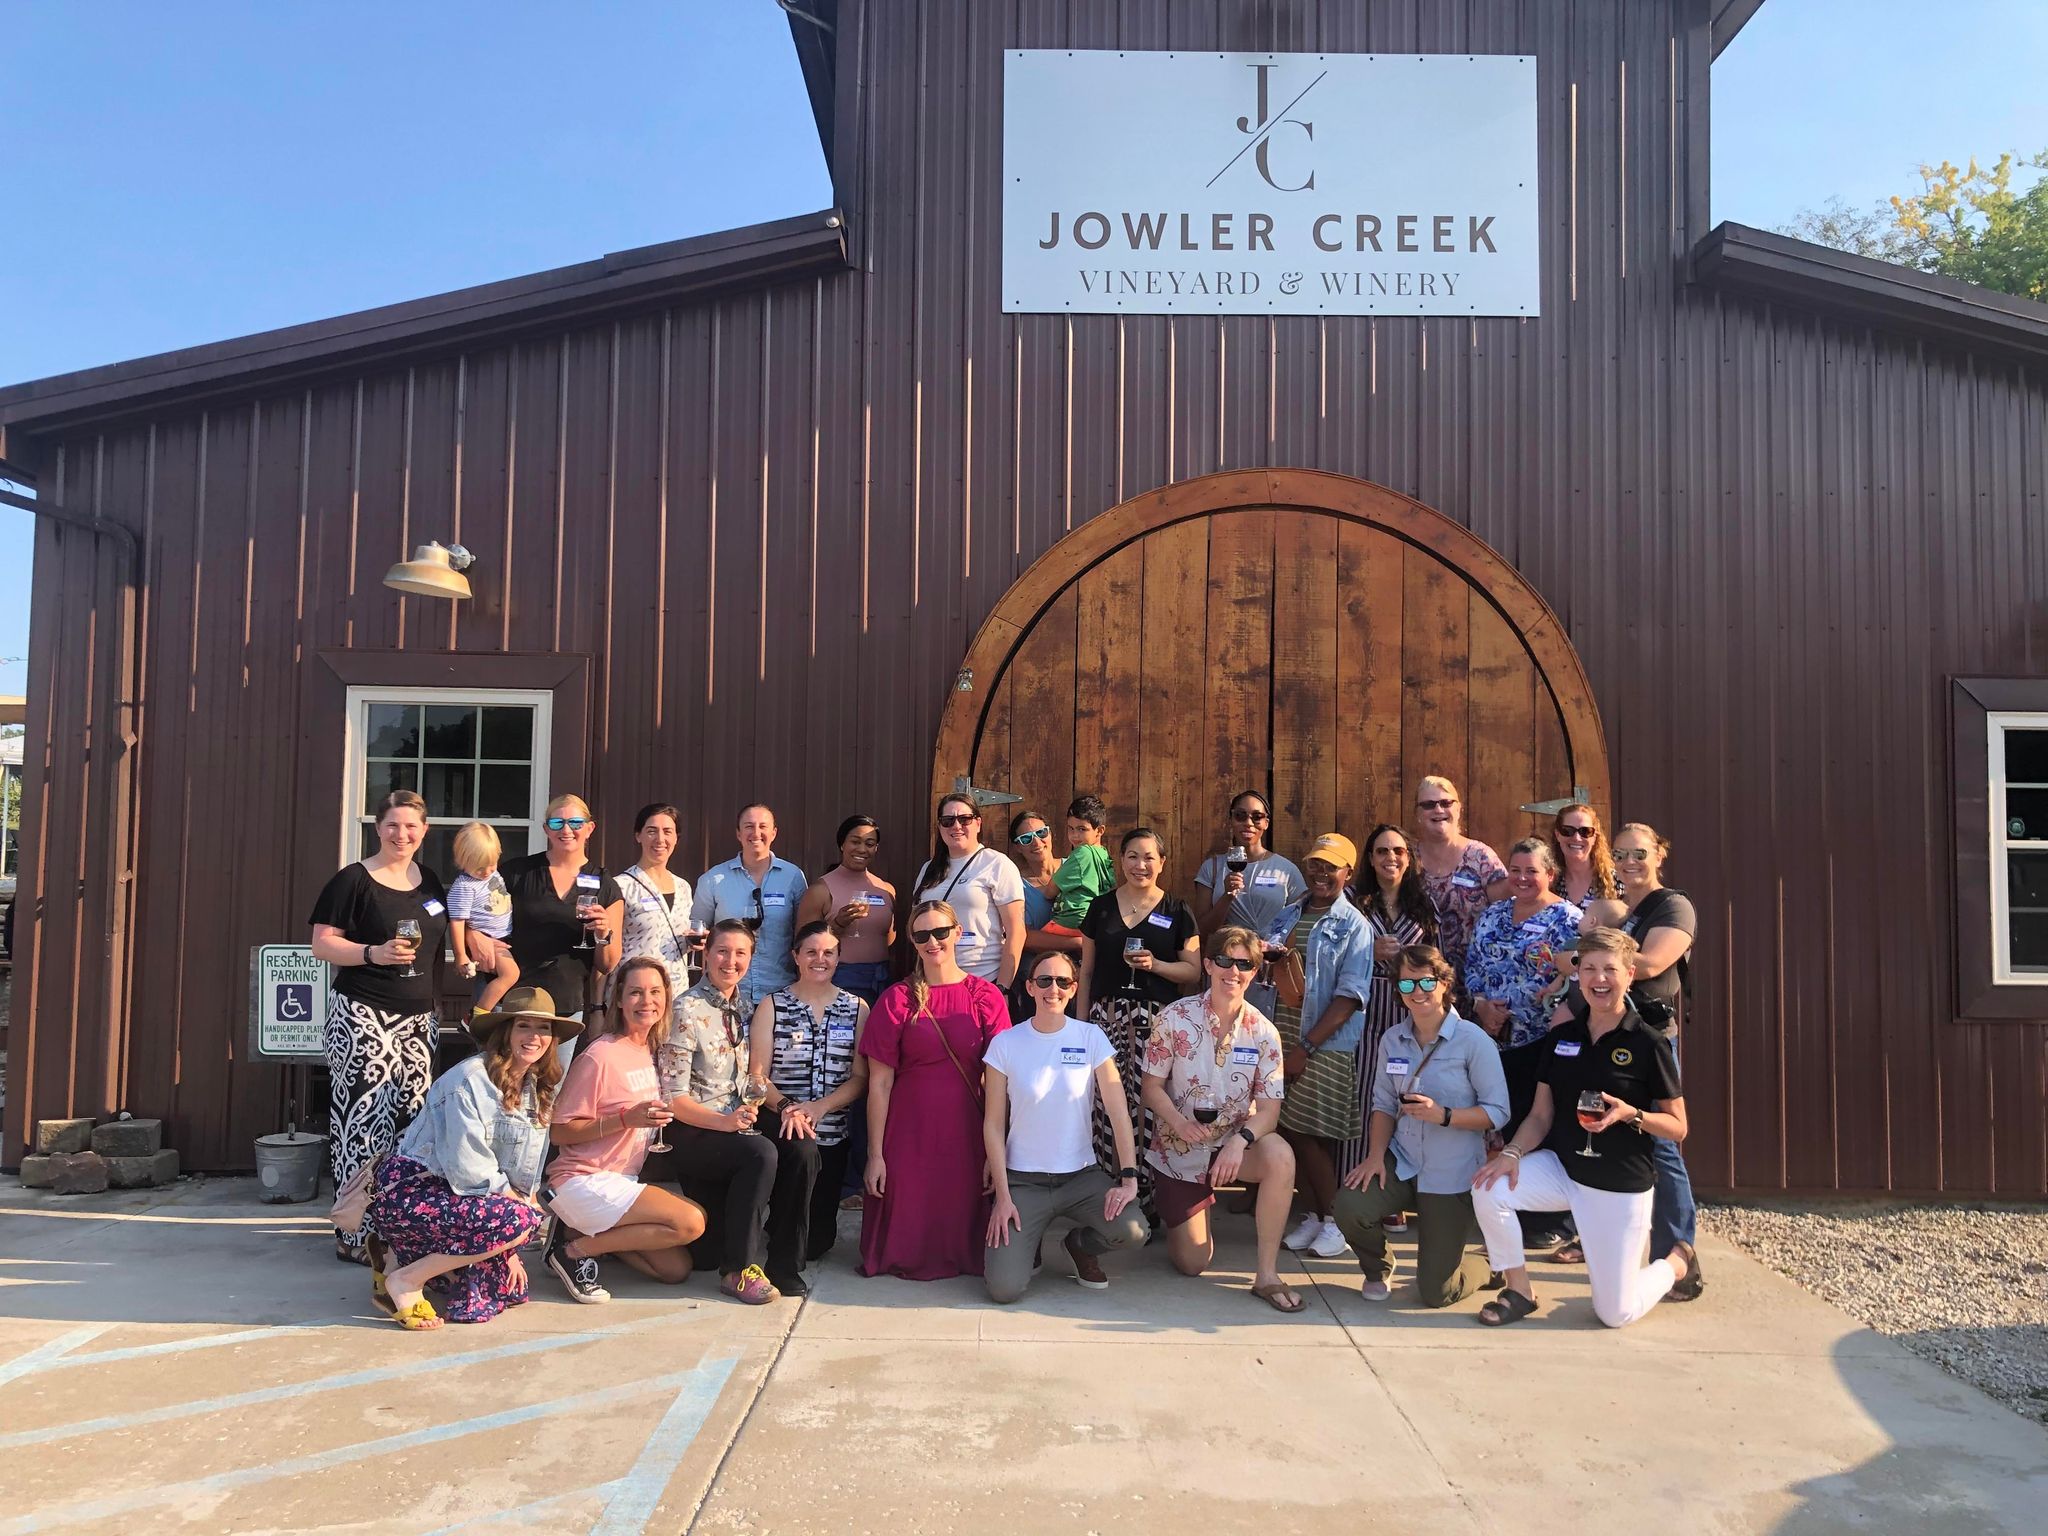 Women from different military services and government agencies attended the Women and Leadership social at Jowler Creek Vineyard & Winery.